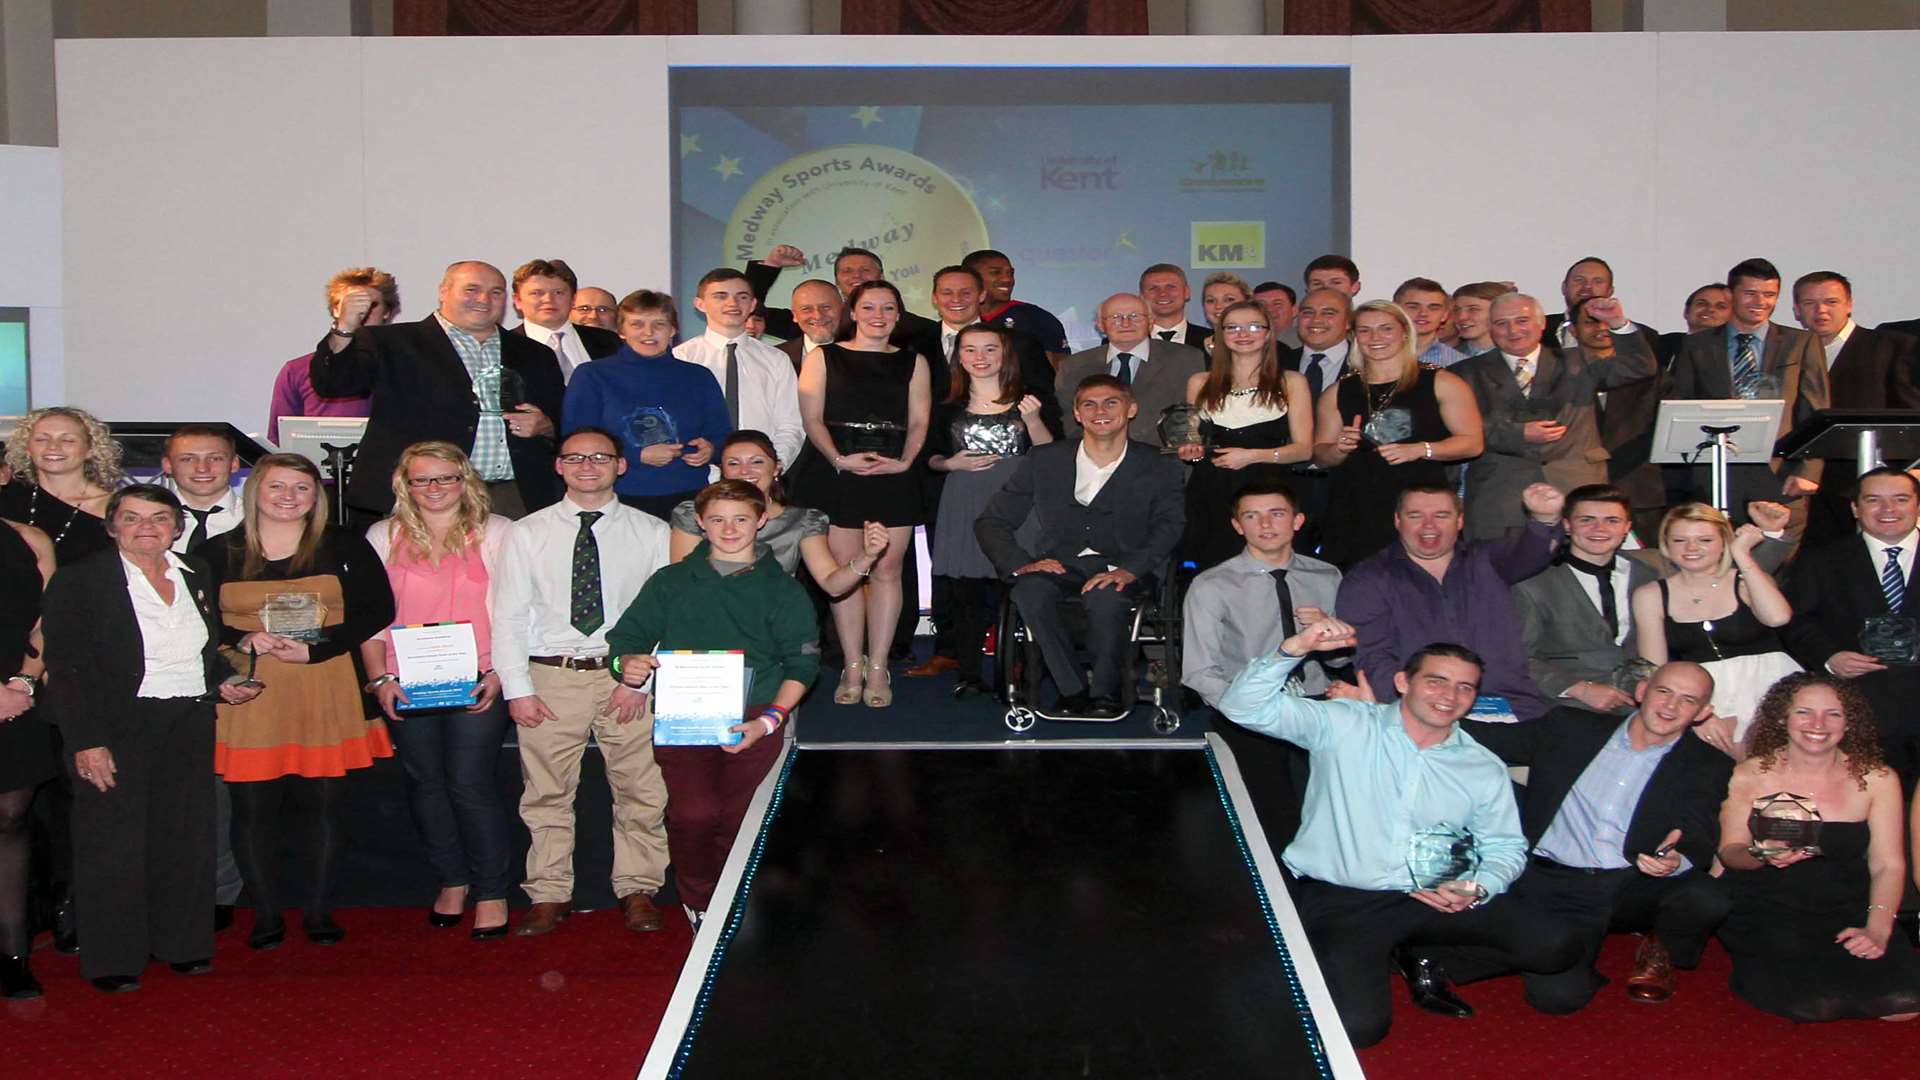 Some of the winners at the 2012 Medway Sports Awards. Picture: Darren Small